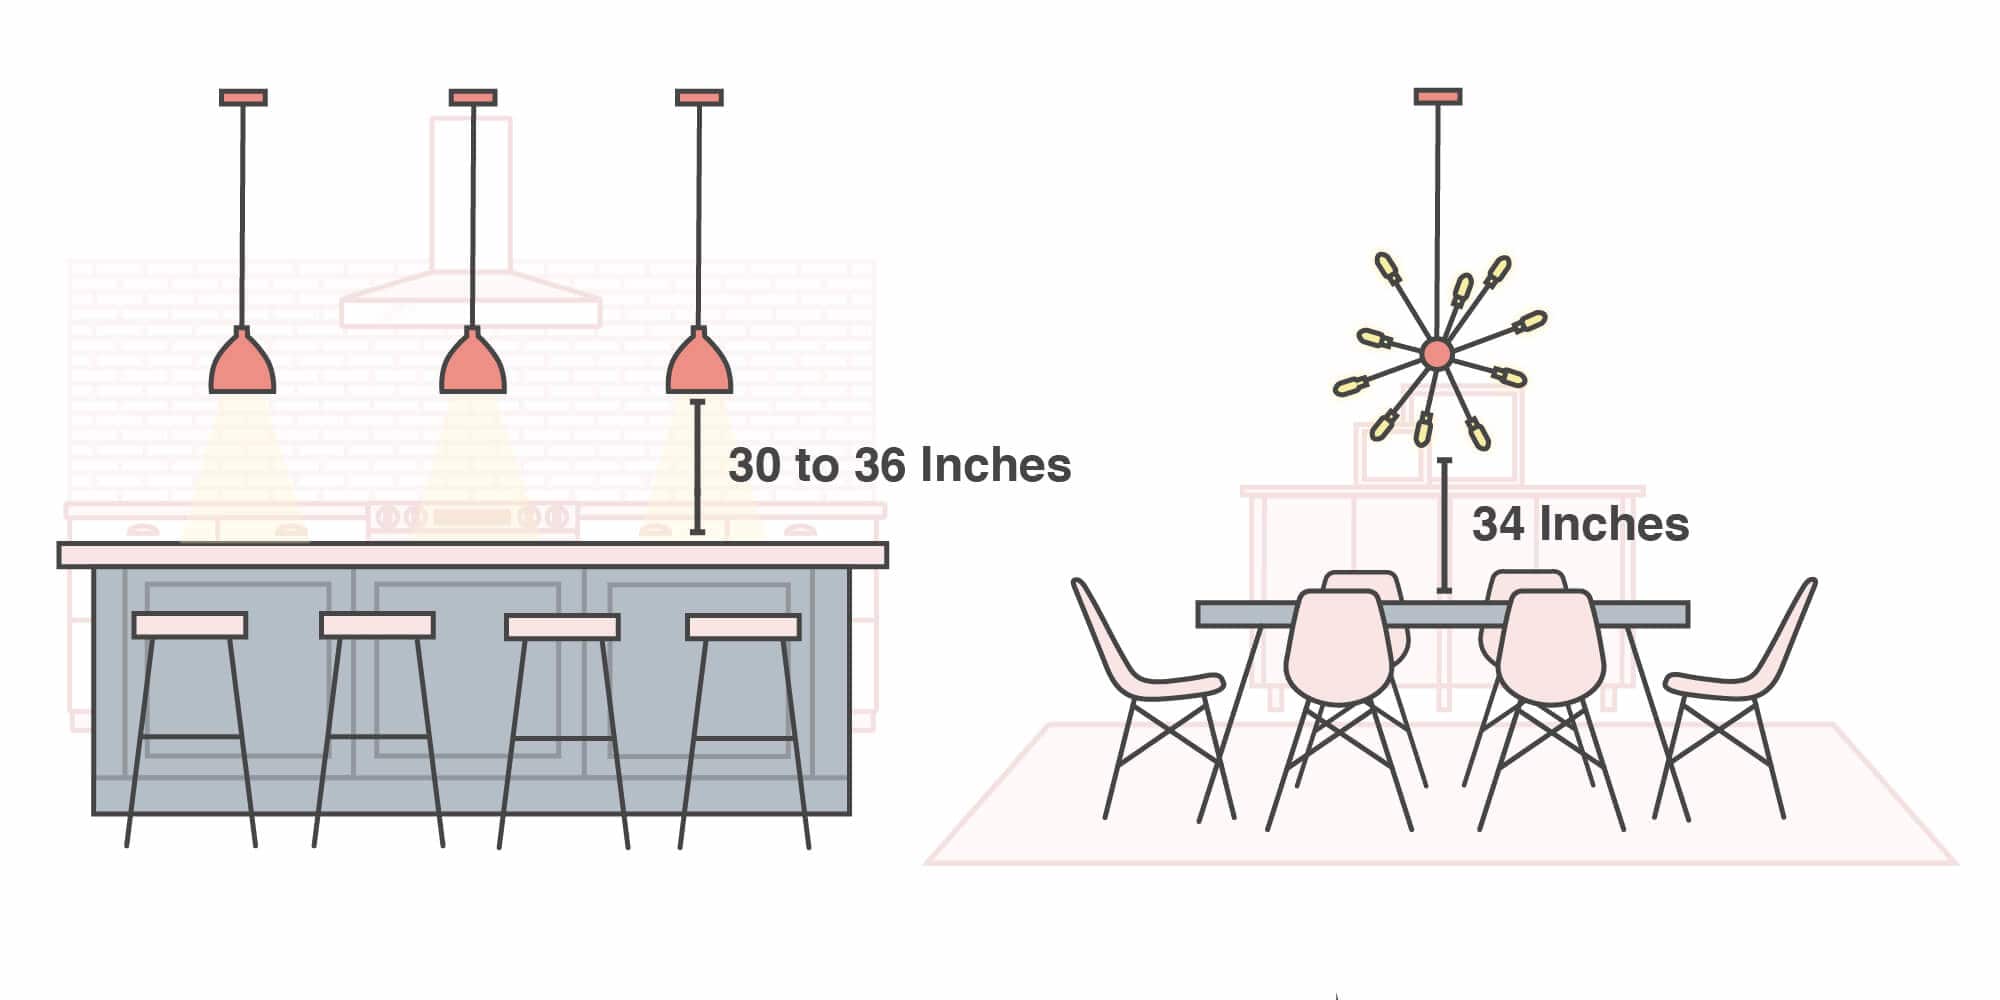 An infographic of pendants hanging over a kitchen island and a chandelier hanging over a dining table 